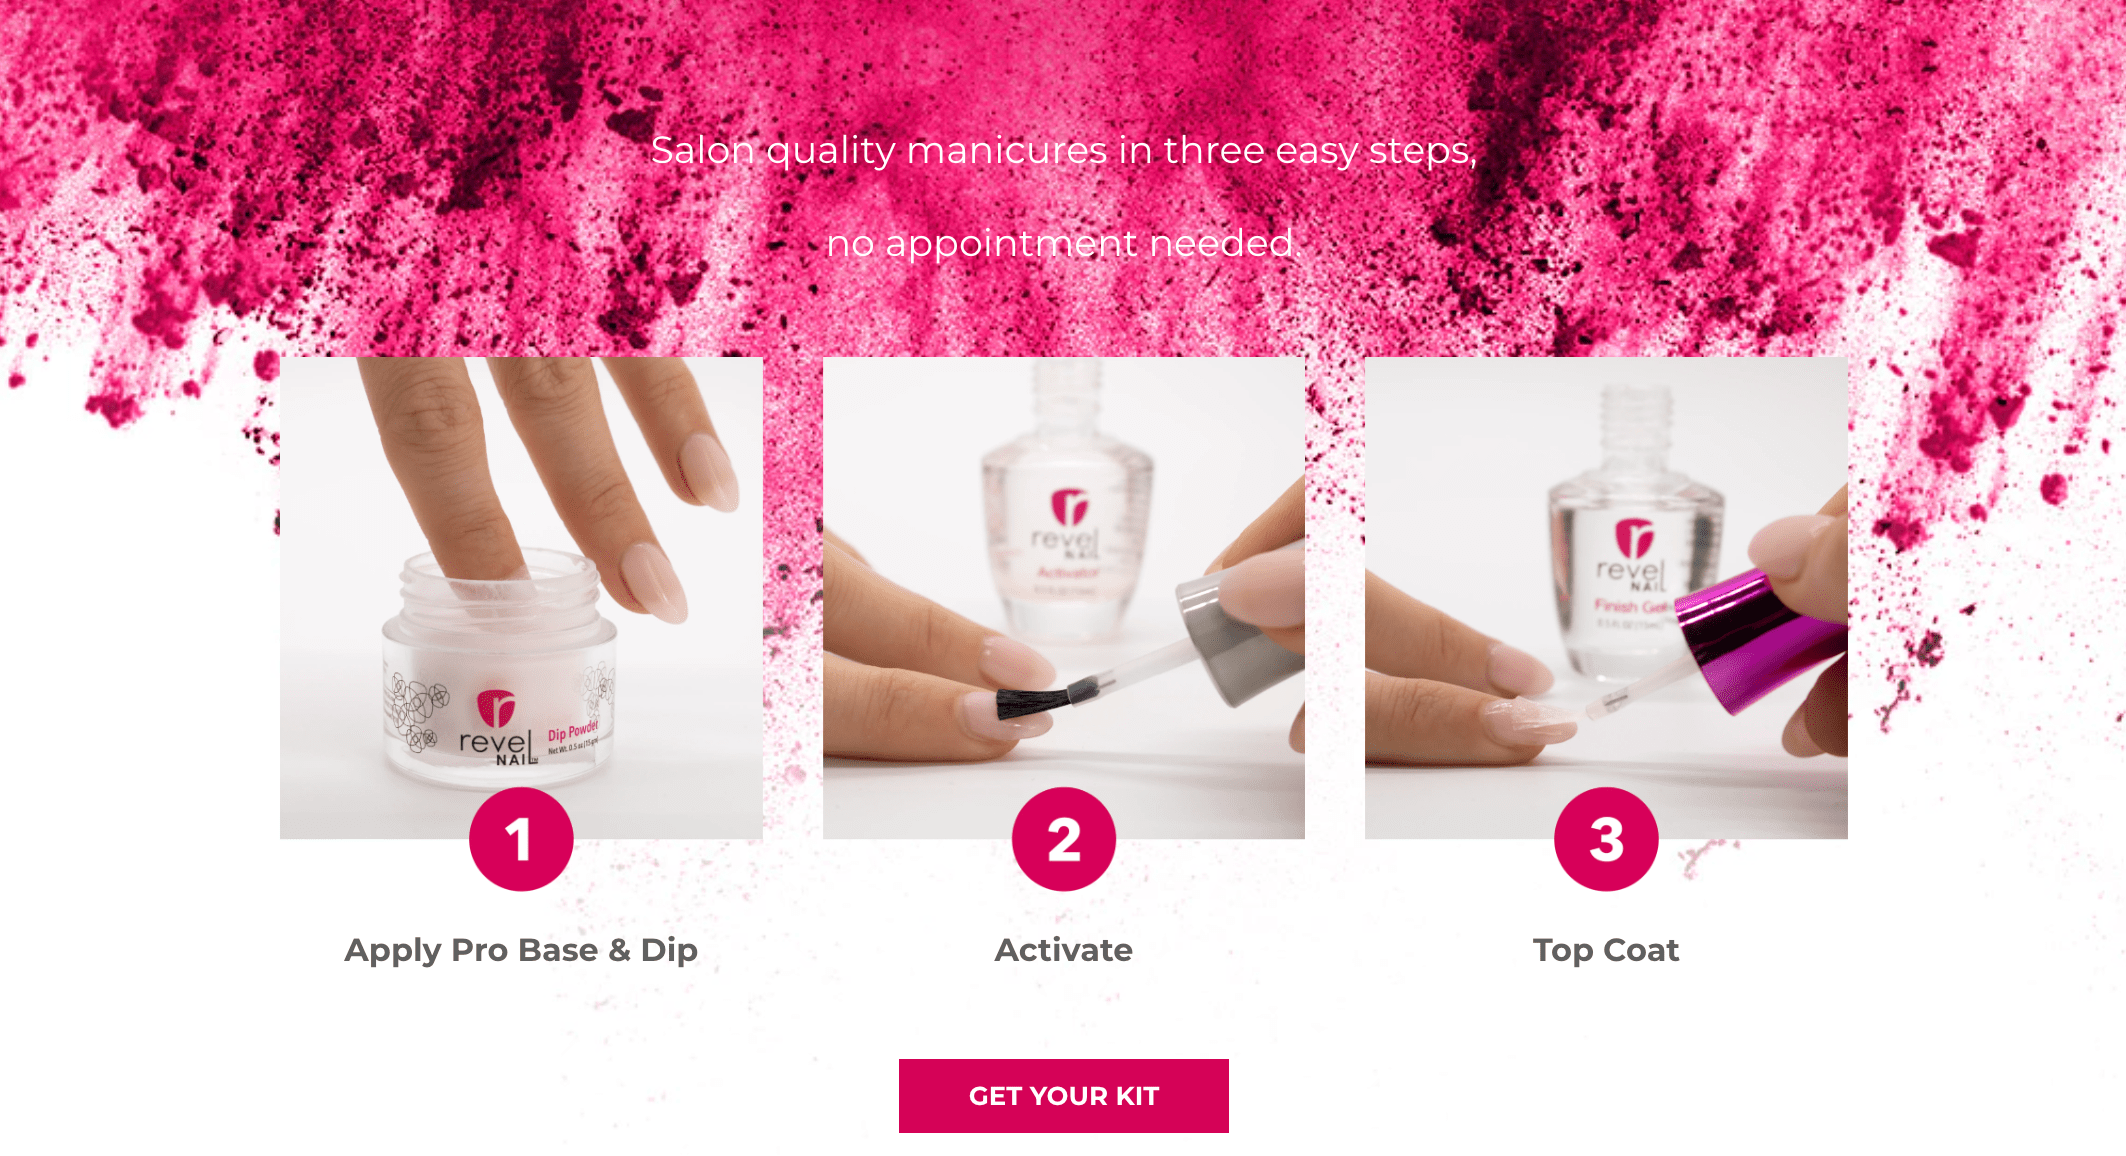 Have a long lasting manicure in three easy steps with our Dip Powder Liquid system.